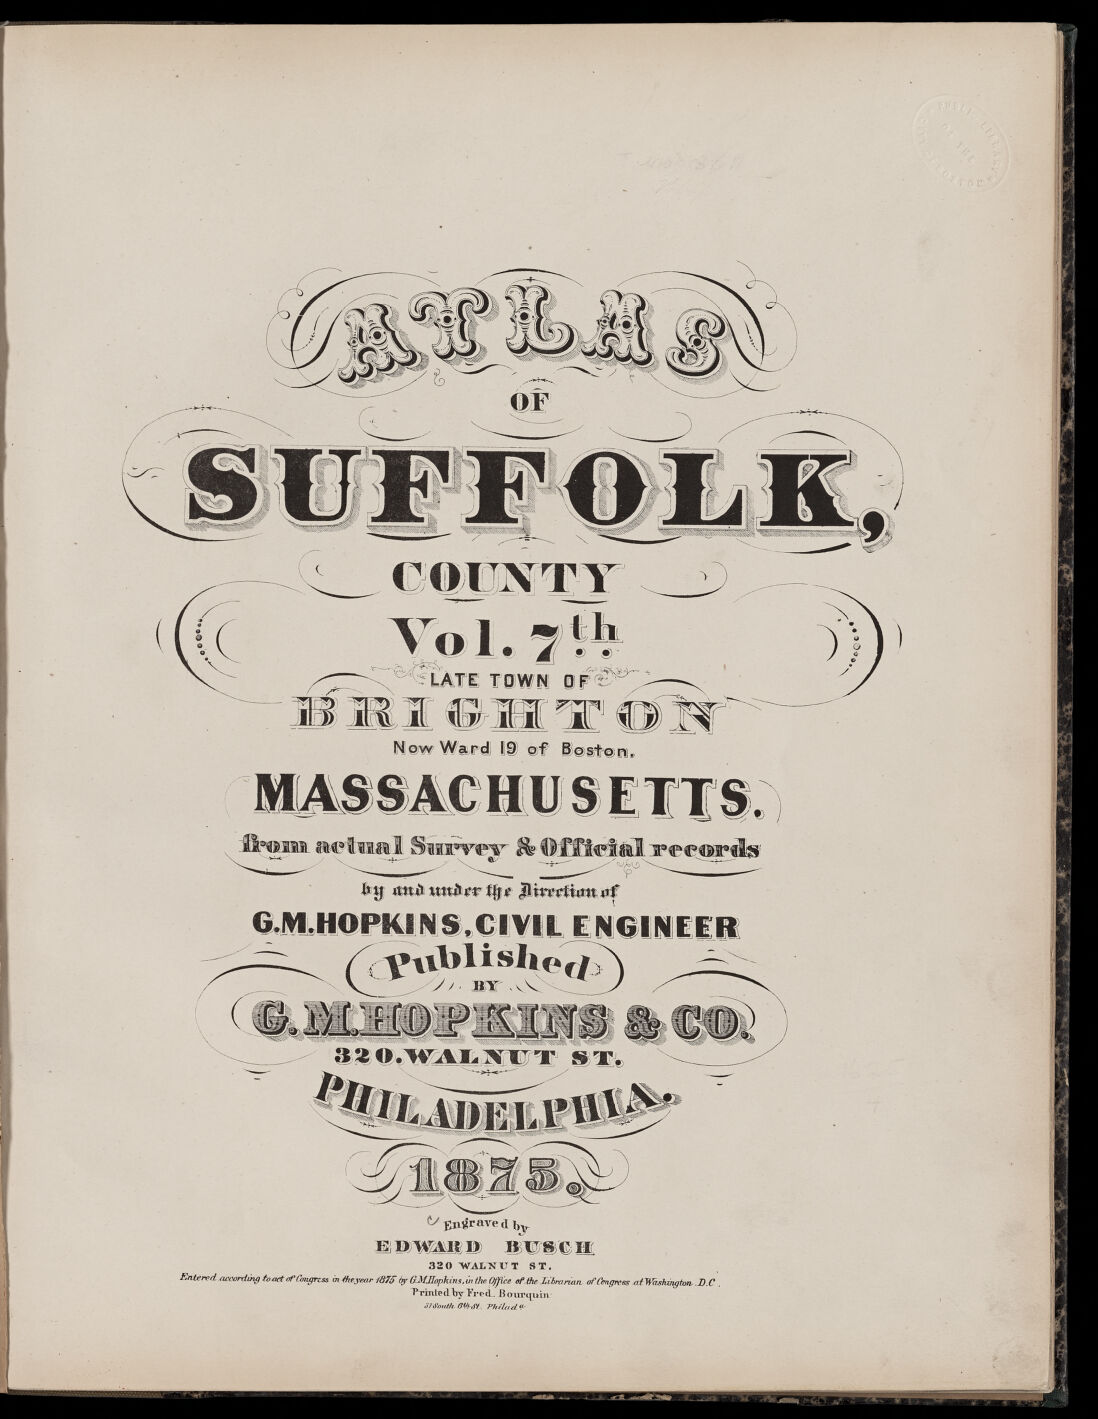 Atlas of Suffolk, county, vol. 7th, late town of Brighton, now ward 19 of Boston, Massachusetts